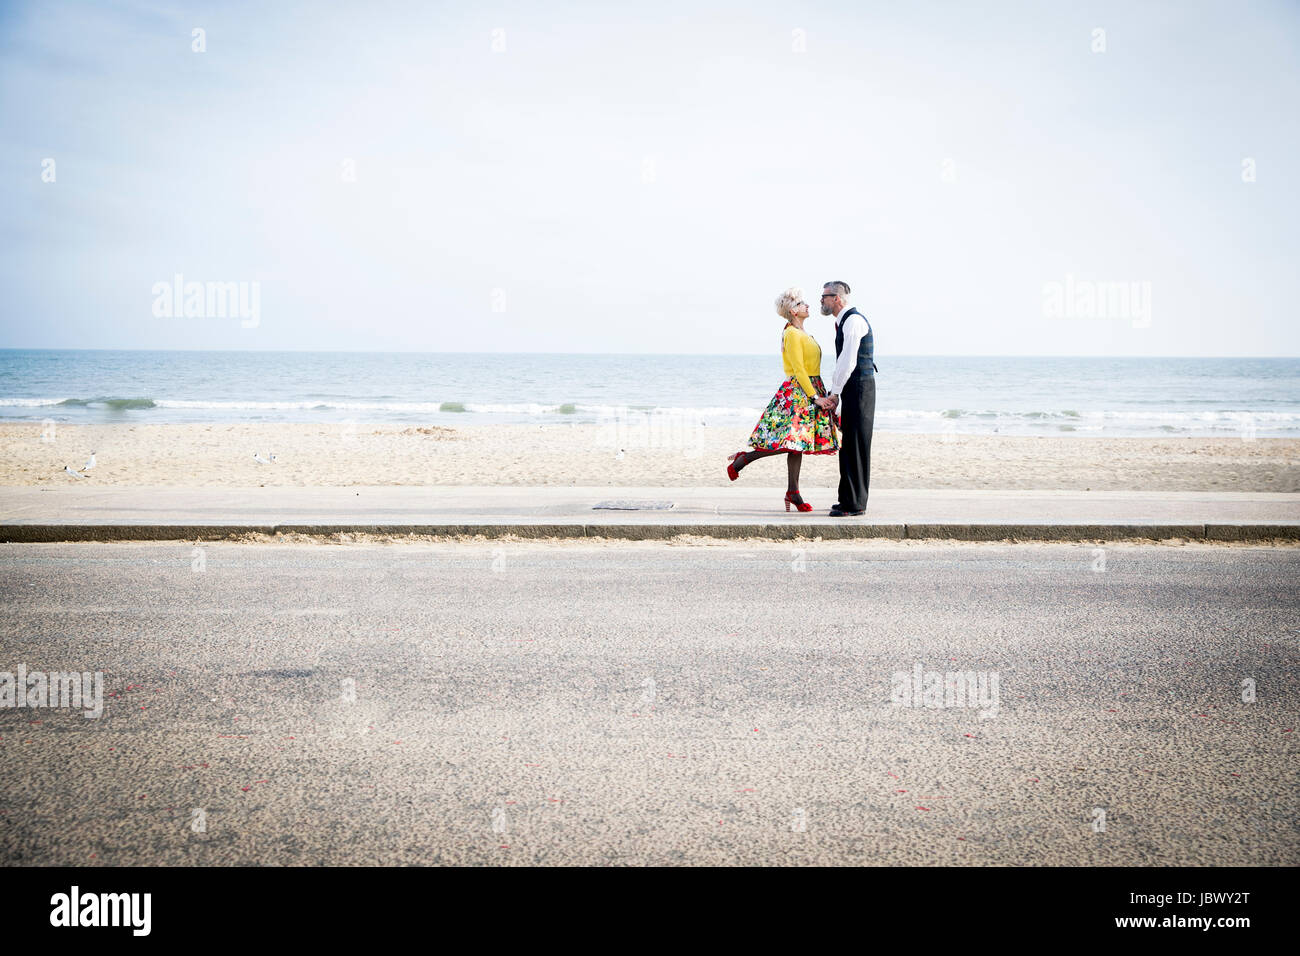 Style années 50 vintage couple holding hands on beach Banque D'Images